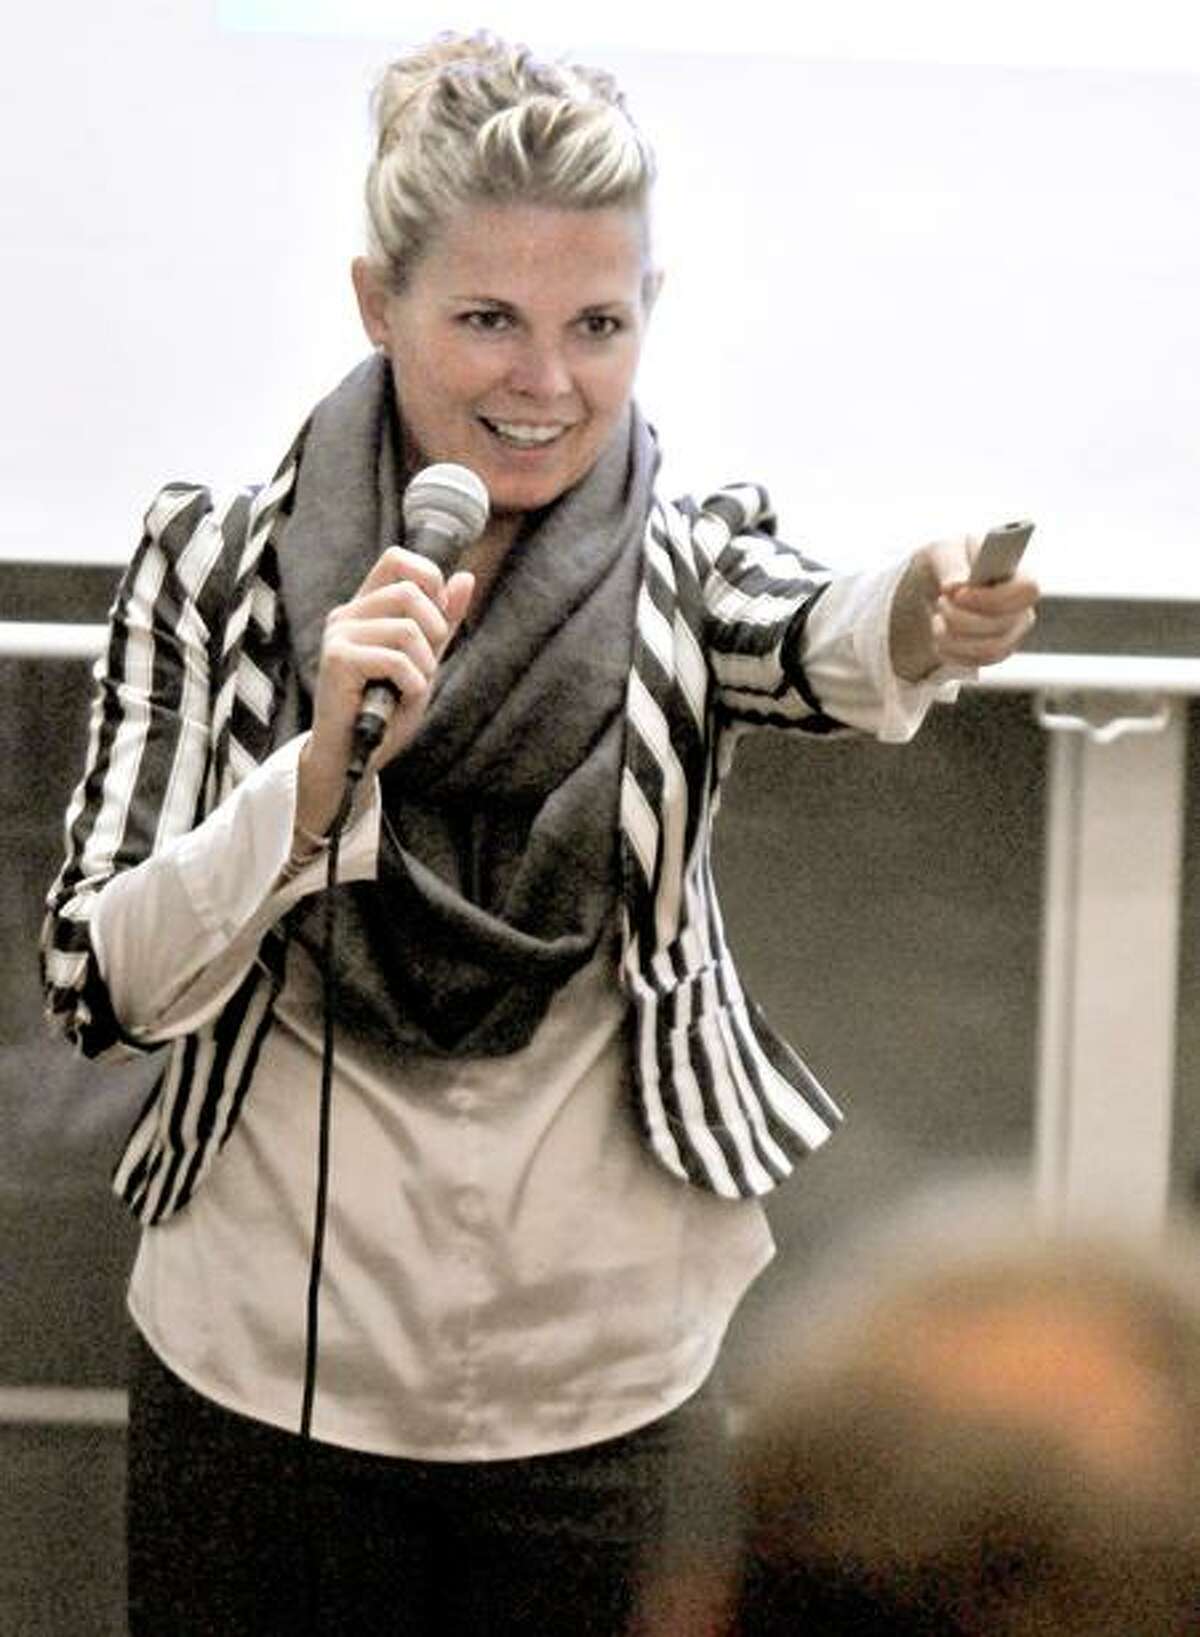 Candace Klein, founder of Bad Girl Ventures and an attorney that advises start-ups, gives the keynote speech, "The Secrets of the 3-minute pitch," to would-be entrepreneurs during the inaugural Startup Weekend New Haven event at The Grove on Orange Street in New Haven Saturday. Peter Hvizdak/Register